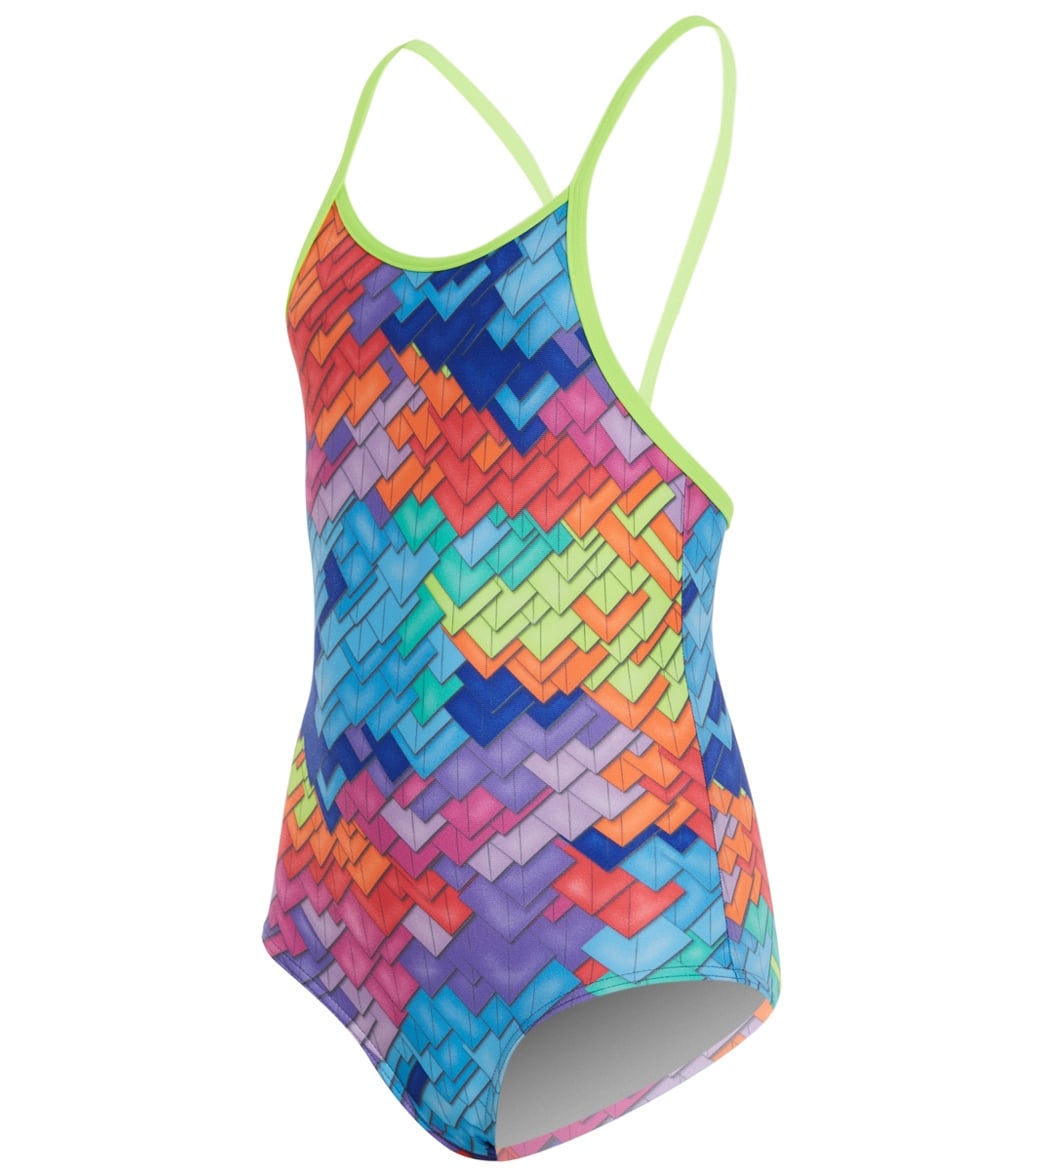 Funkita Toddler Girls Layer Cake One Piece Swimsuit - Multi Pink 2T - Swimoutlet.com